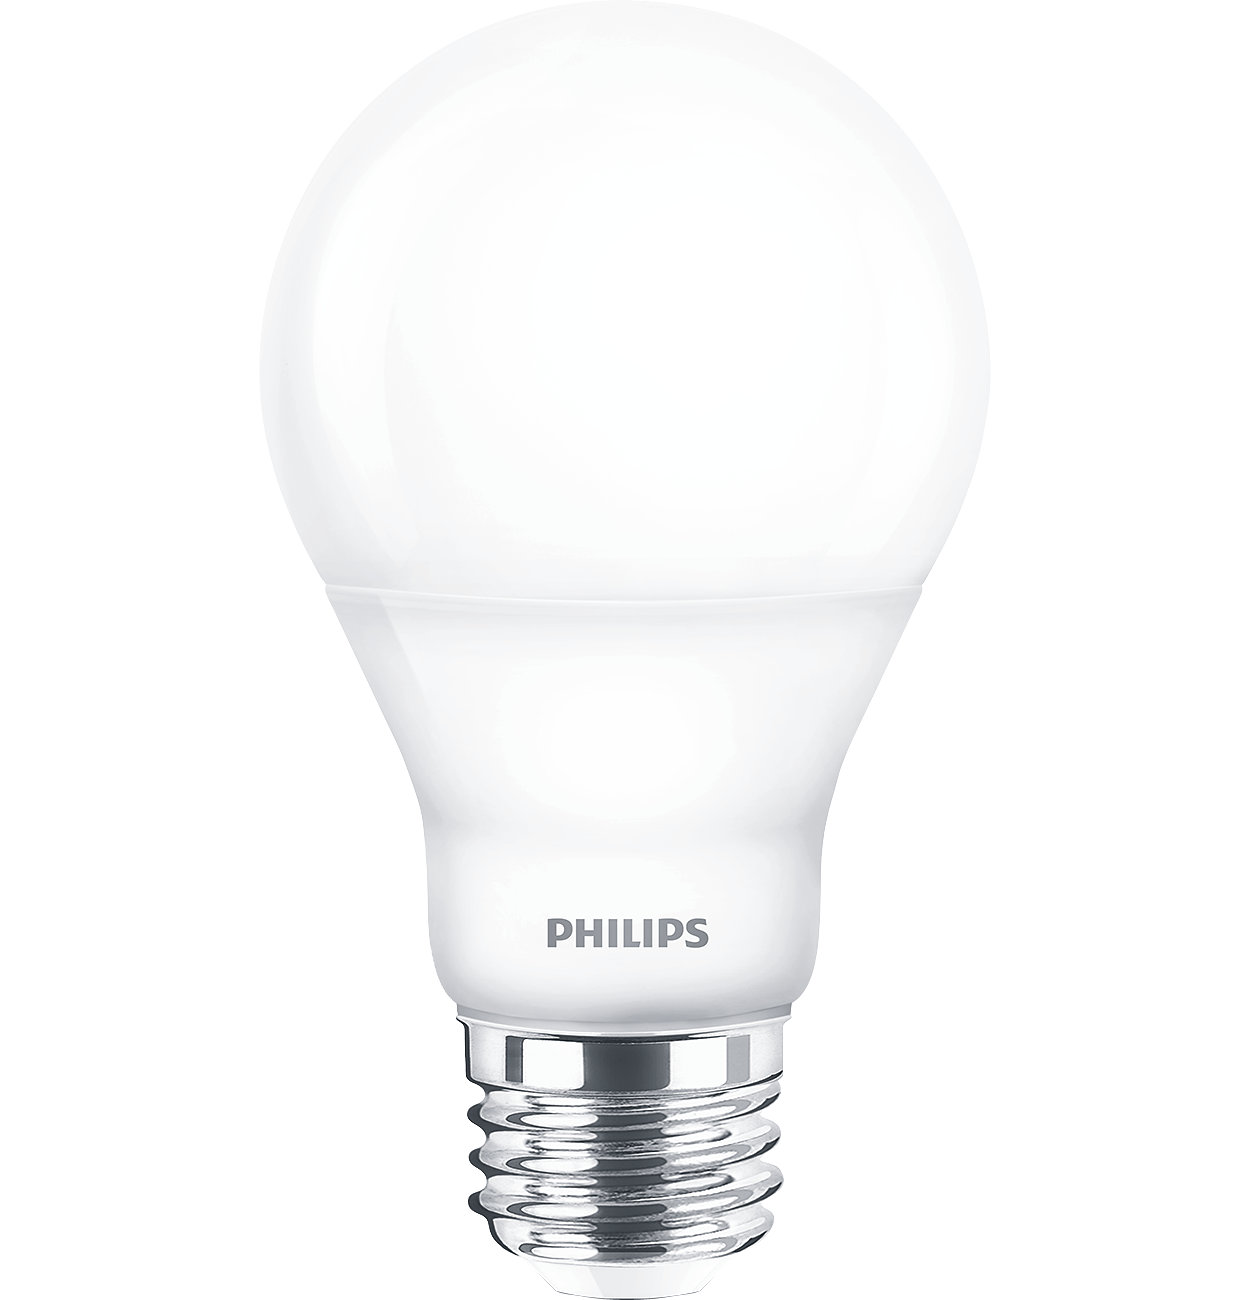 Attractive, dimmable, LED alternative to popular incandescent 